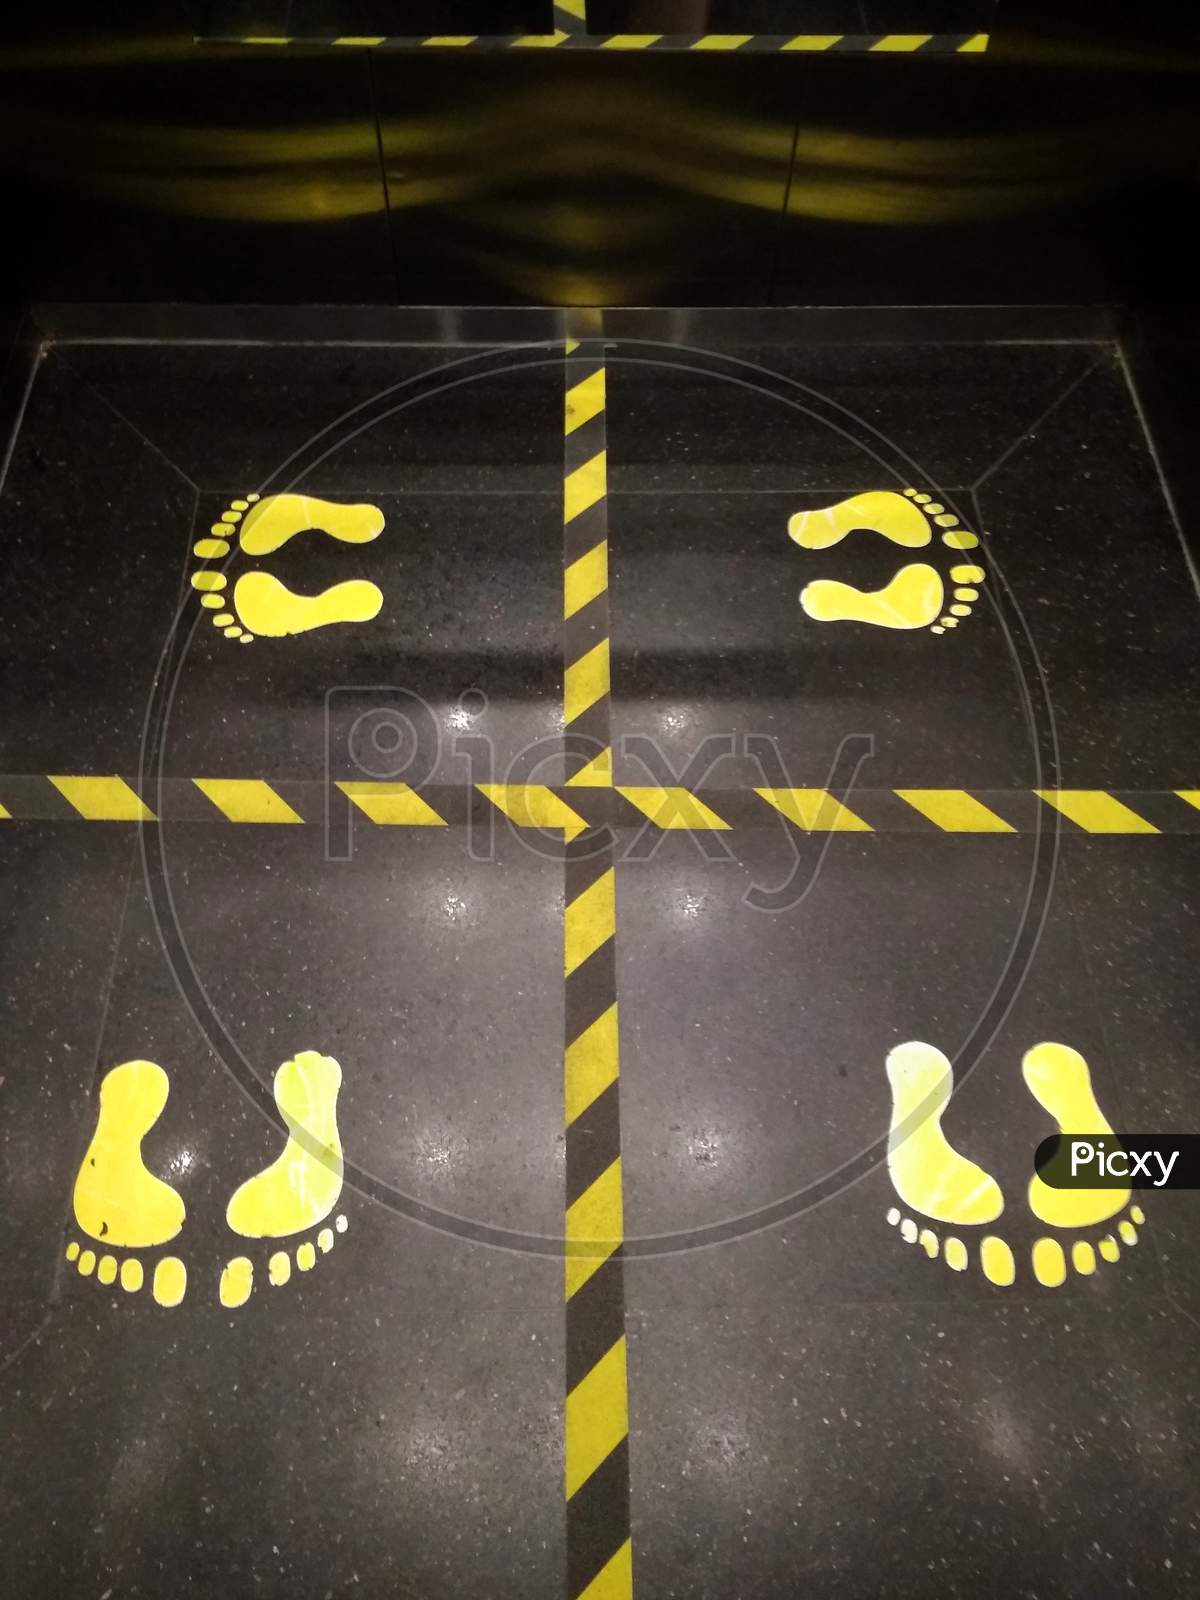 Footwear stickers that indicate the direction of a person must stand facing his body when using the elevator in the new normal era